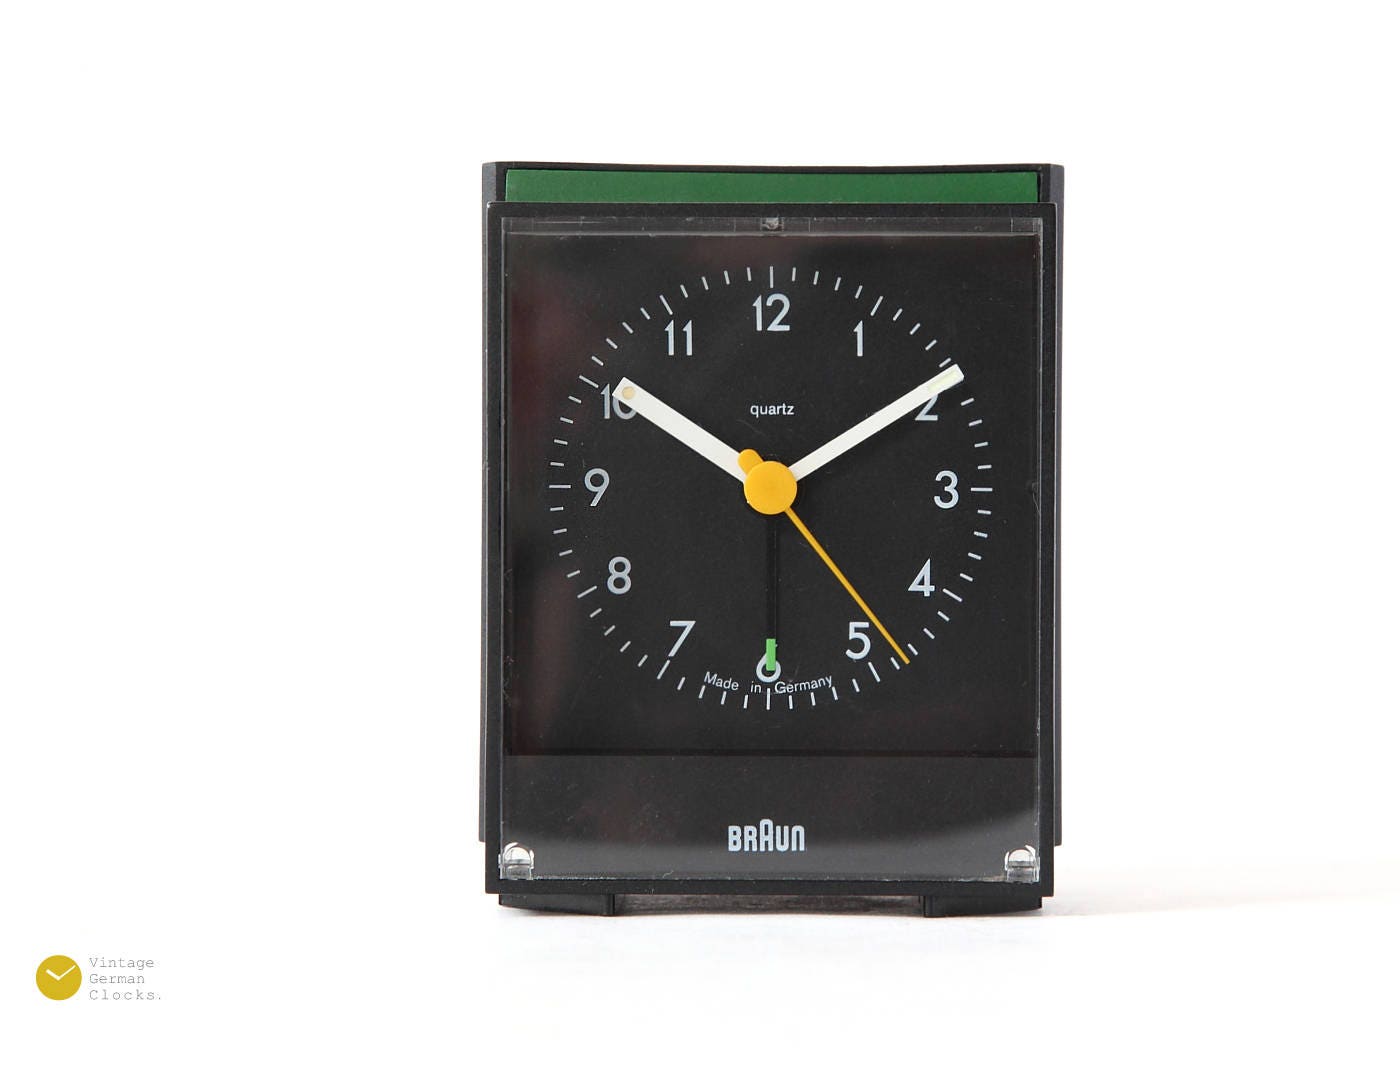 BRAUN AB 4 Alarm Clock - type 4749 - 1987 by Dietrich Lubs Germany desk  table Design AB4 1980s 80s - Wecker